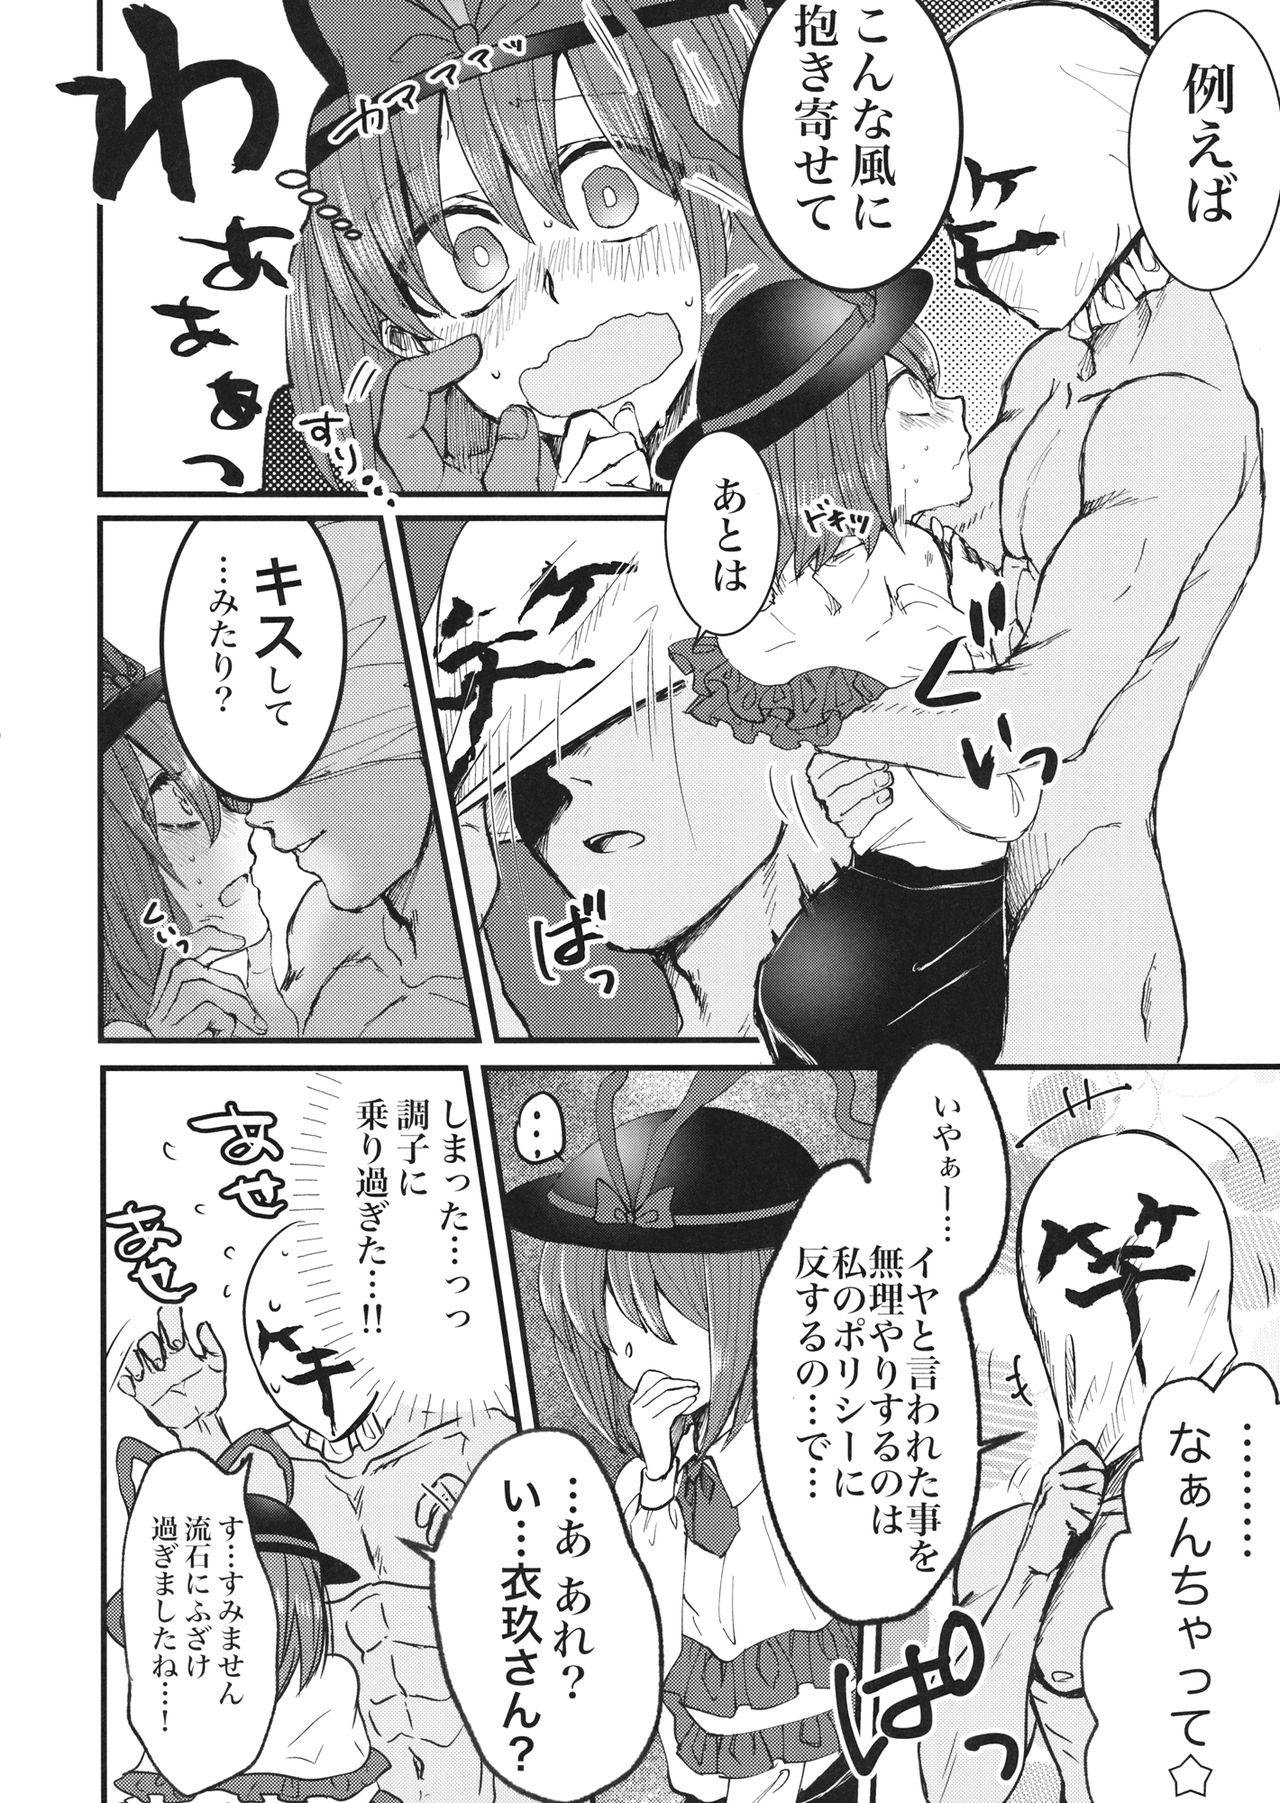 Private 衣玖さんと一緒に色々頑張る本 - Touhou project Facial - Page 9